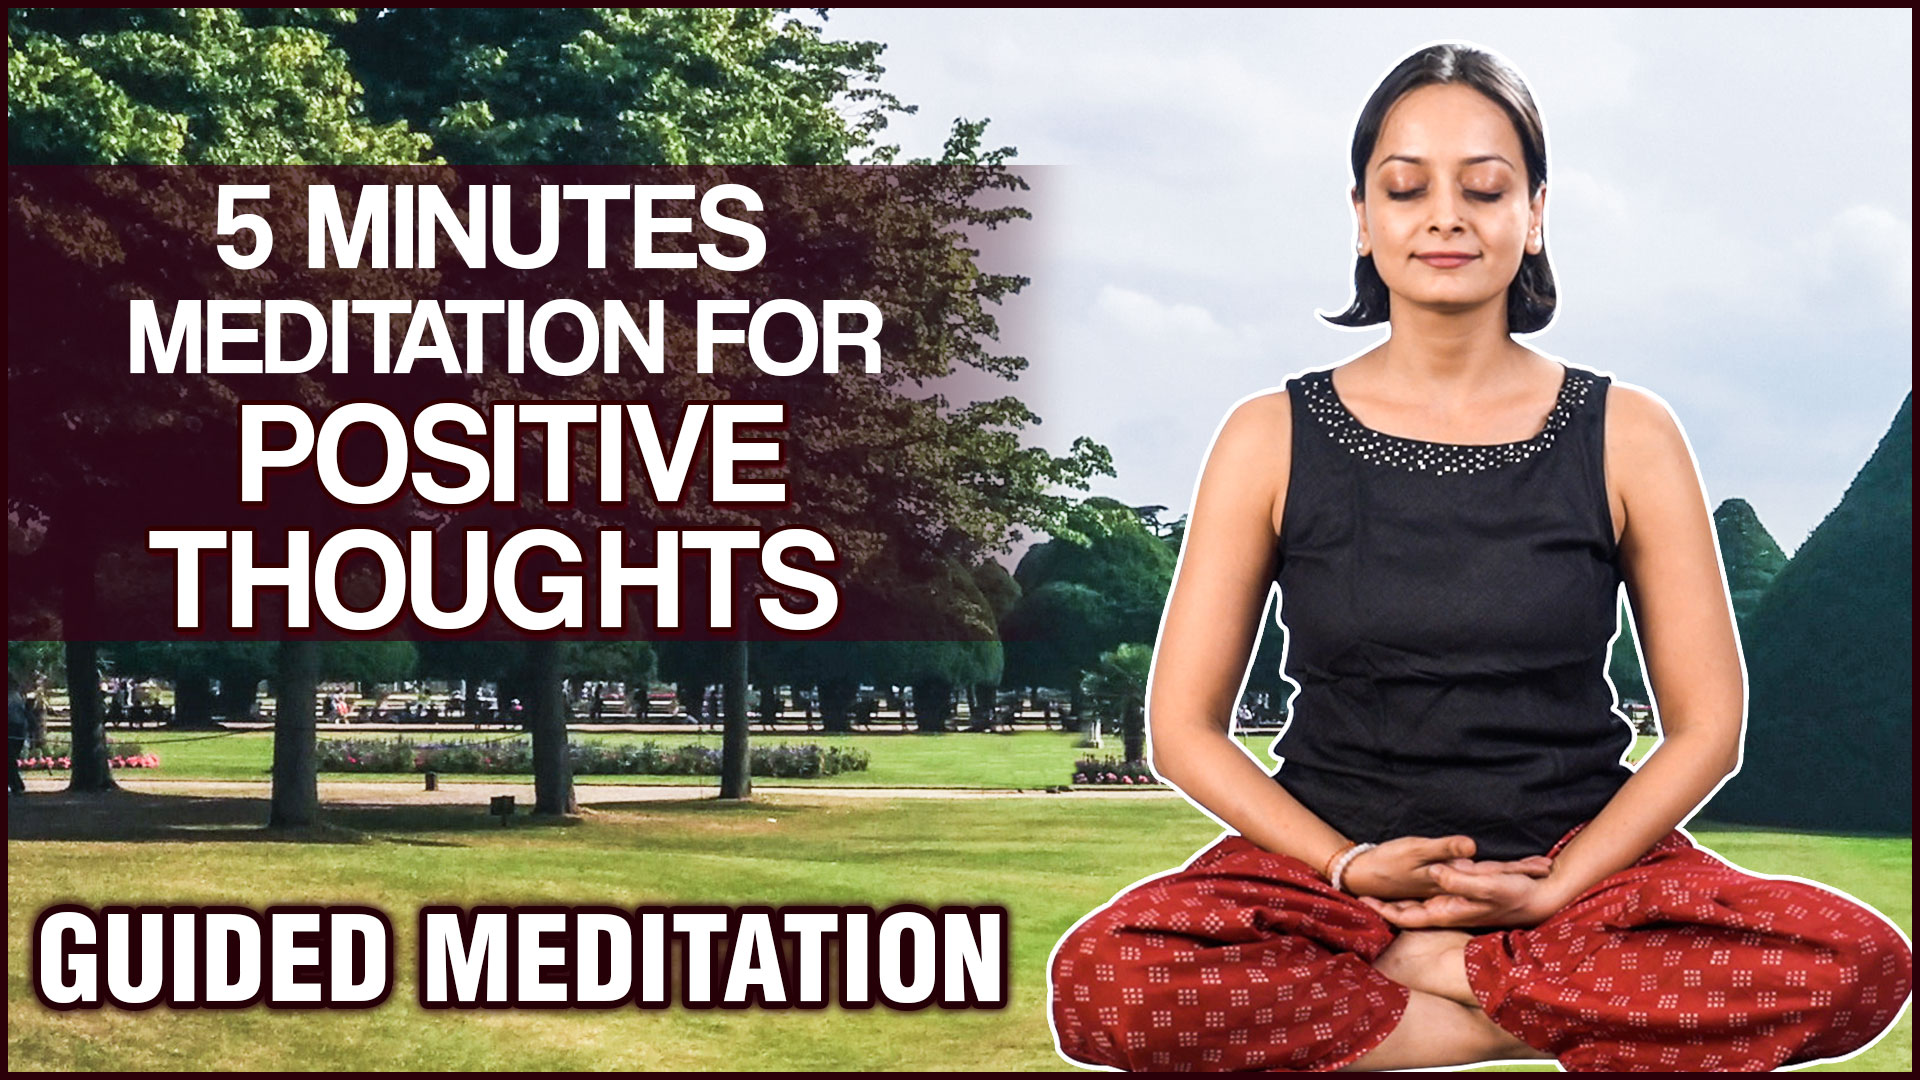 Meditation for Positive Thoughts Break the Addiction to Negative Enrgy